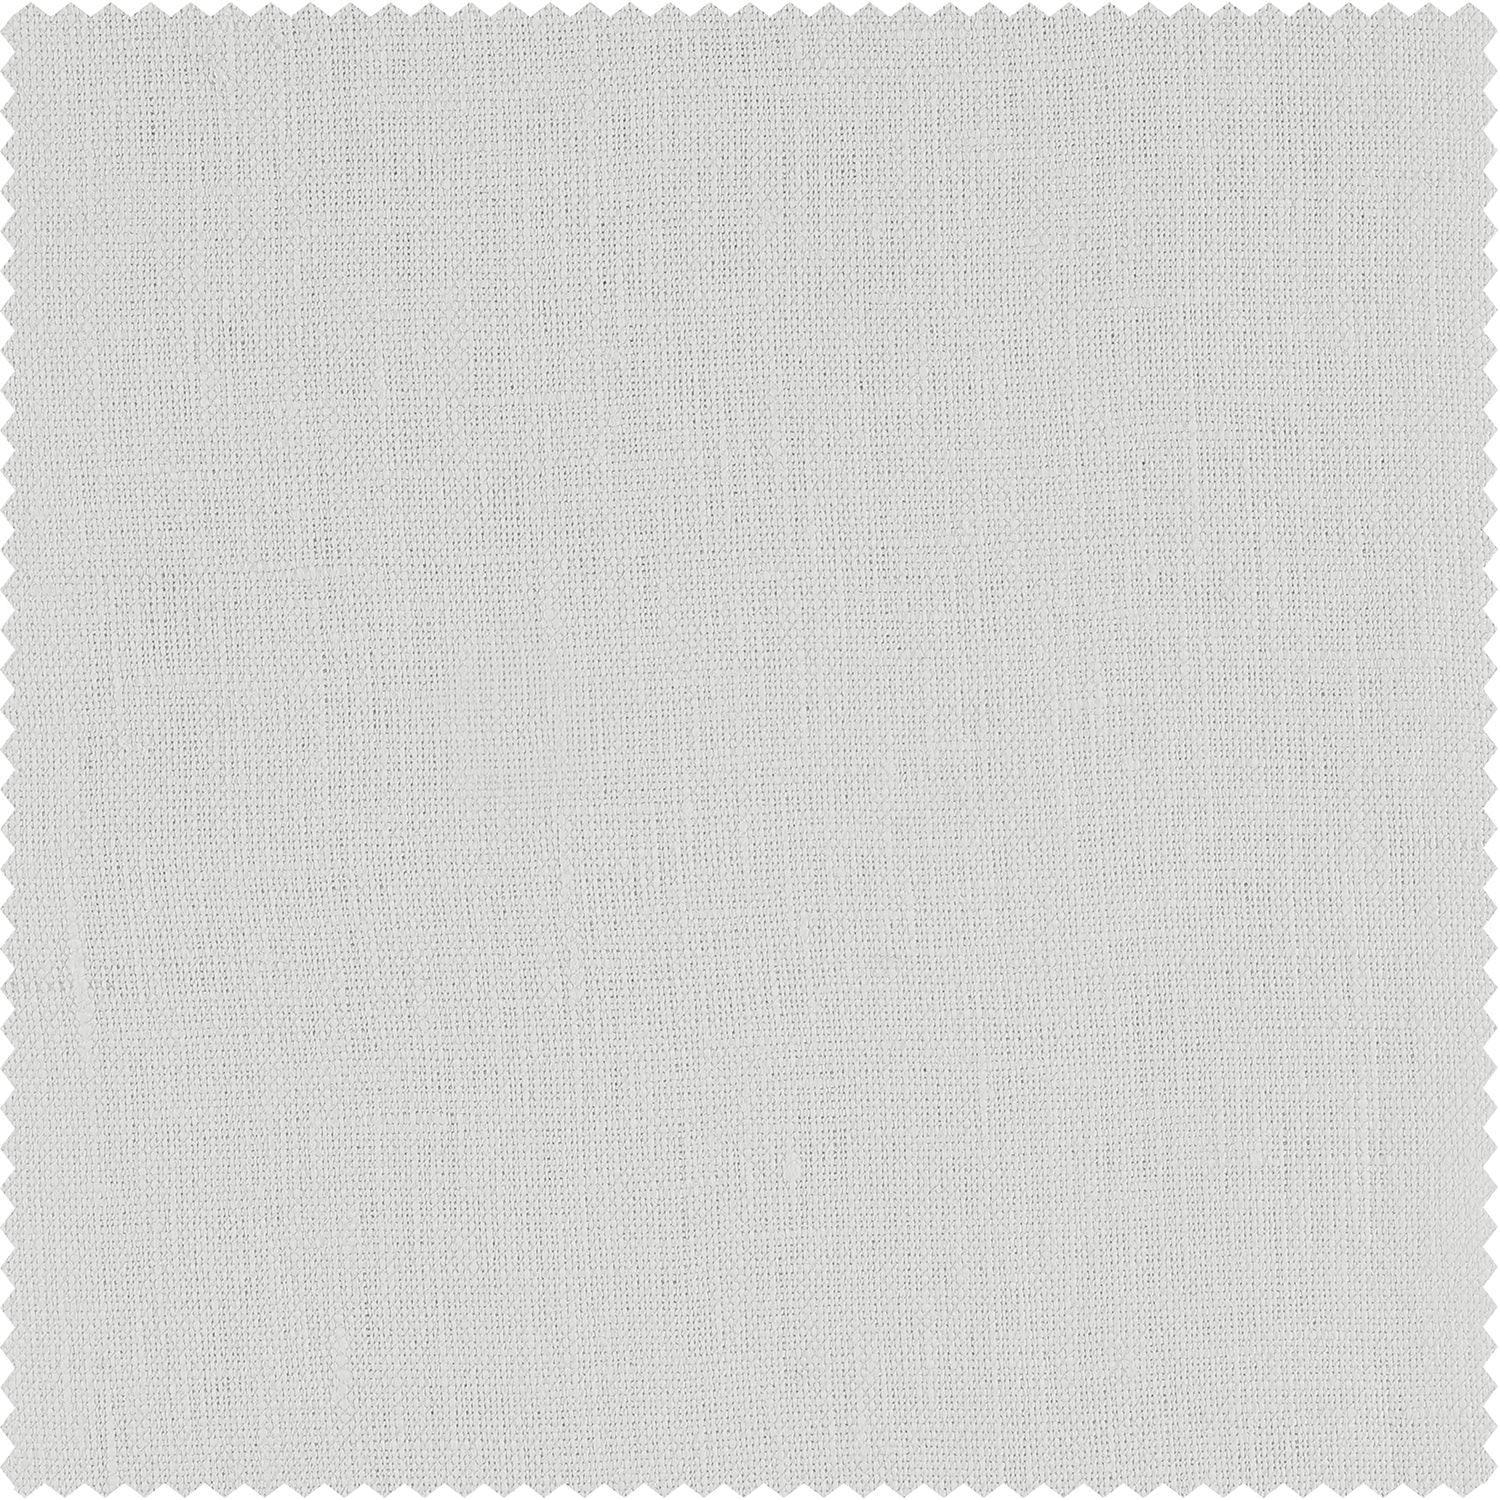 Crisp White French Pleat French Linen Curtain